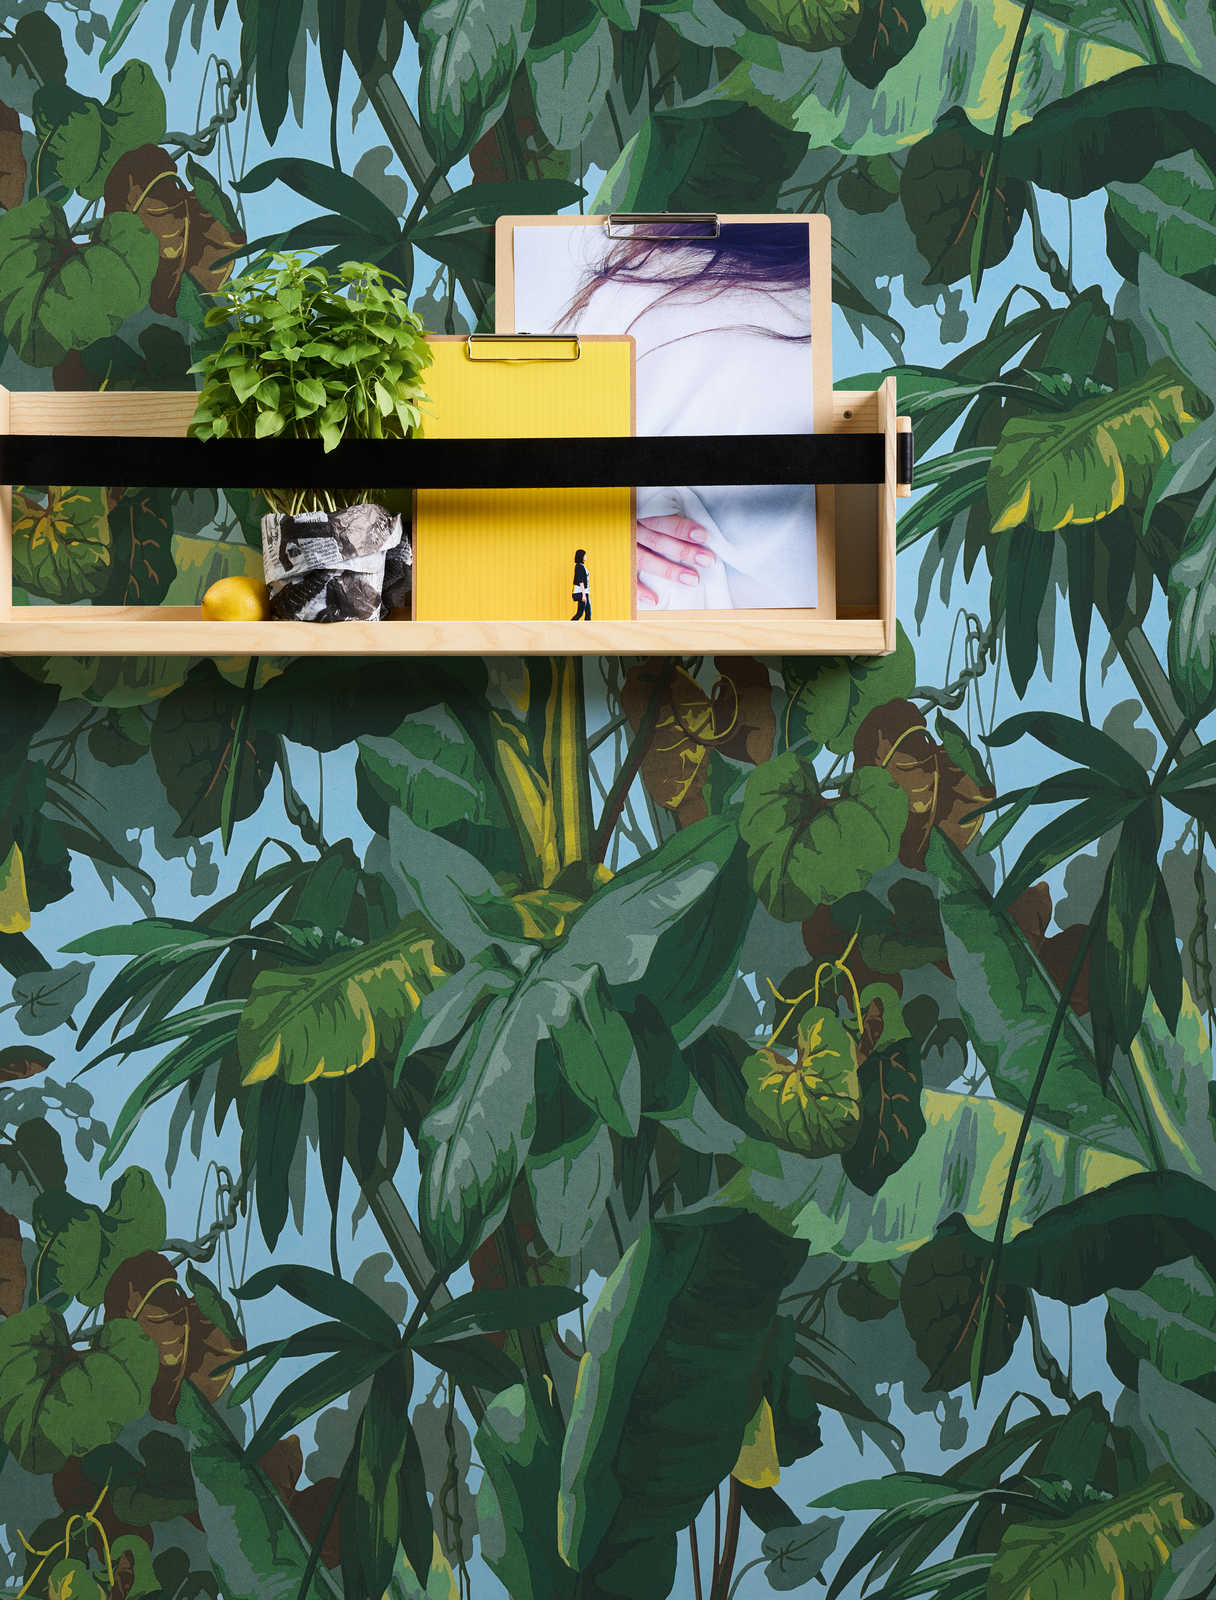             Self-adhesive wallpaper | jungle wallpaper with foliage forest - green, blue, yellow
        